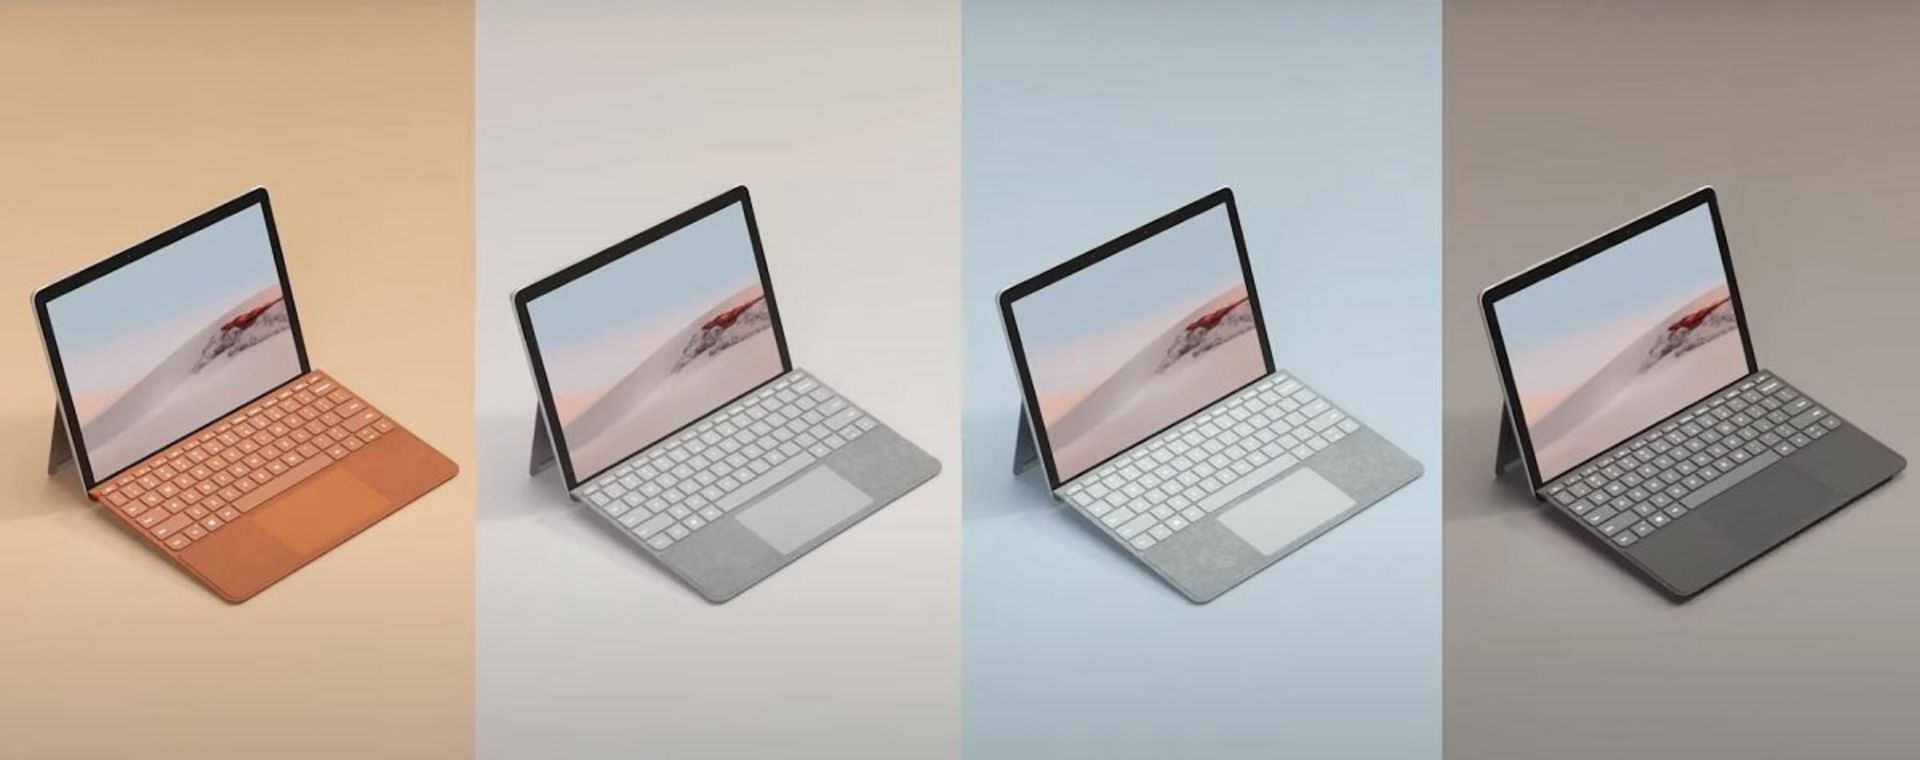 Surface Go 2 Type Cover / کیبورد تایپ کاور سرفیس گو ۲